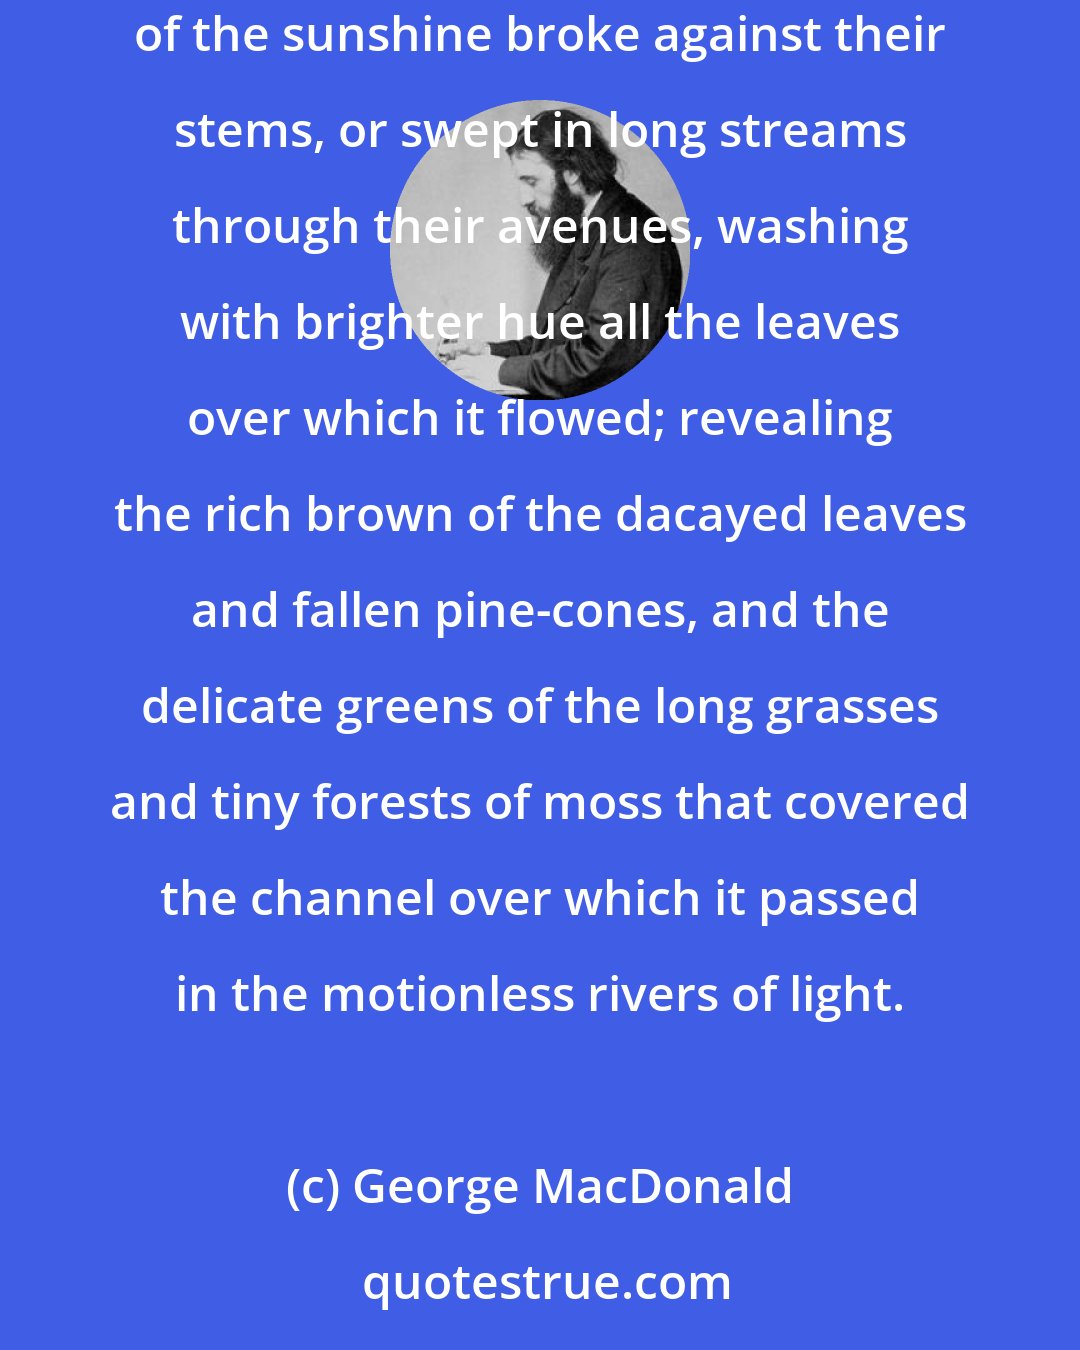 George MacDonald: The trees bathed their great heads in the waves of the morning, while their roots were planted deep in gloom; save where on the borders of the sunshine broke against their stems, or swept in long streams through their avenues, washing with brighter hue all the leaves over which it flowed; revealing the rich brown of the dacayed leaves and fallen pine-cones, and the delicate greens of the long grasses and tiny forests of moss that covered the channel over which it passed in the motionless rivers of light.